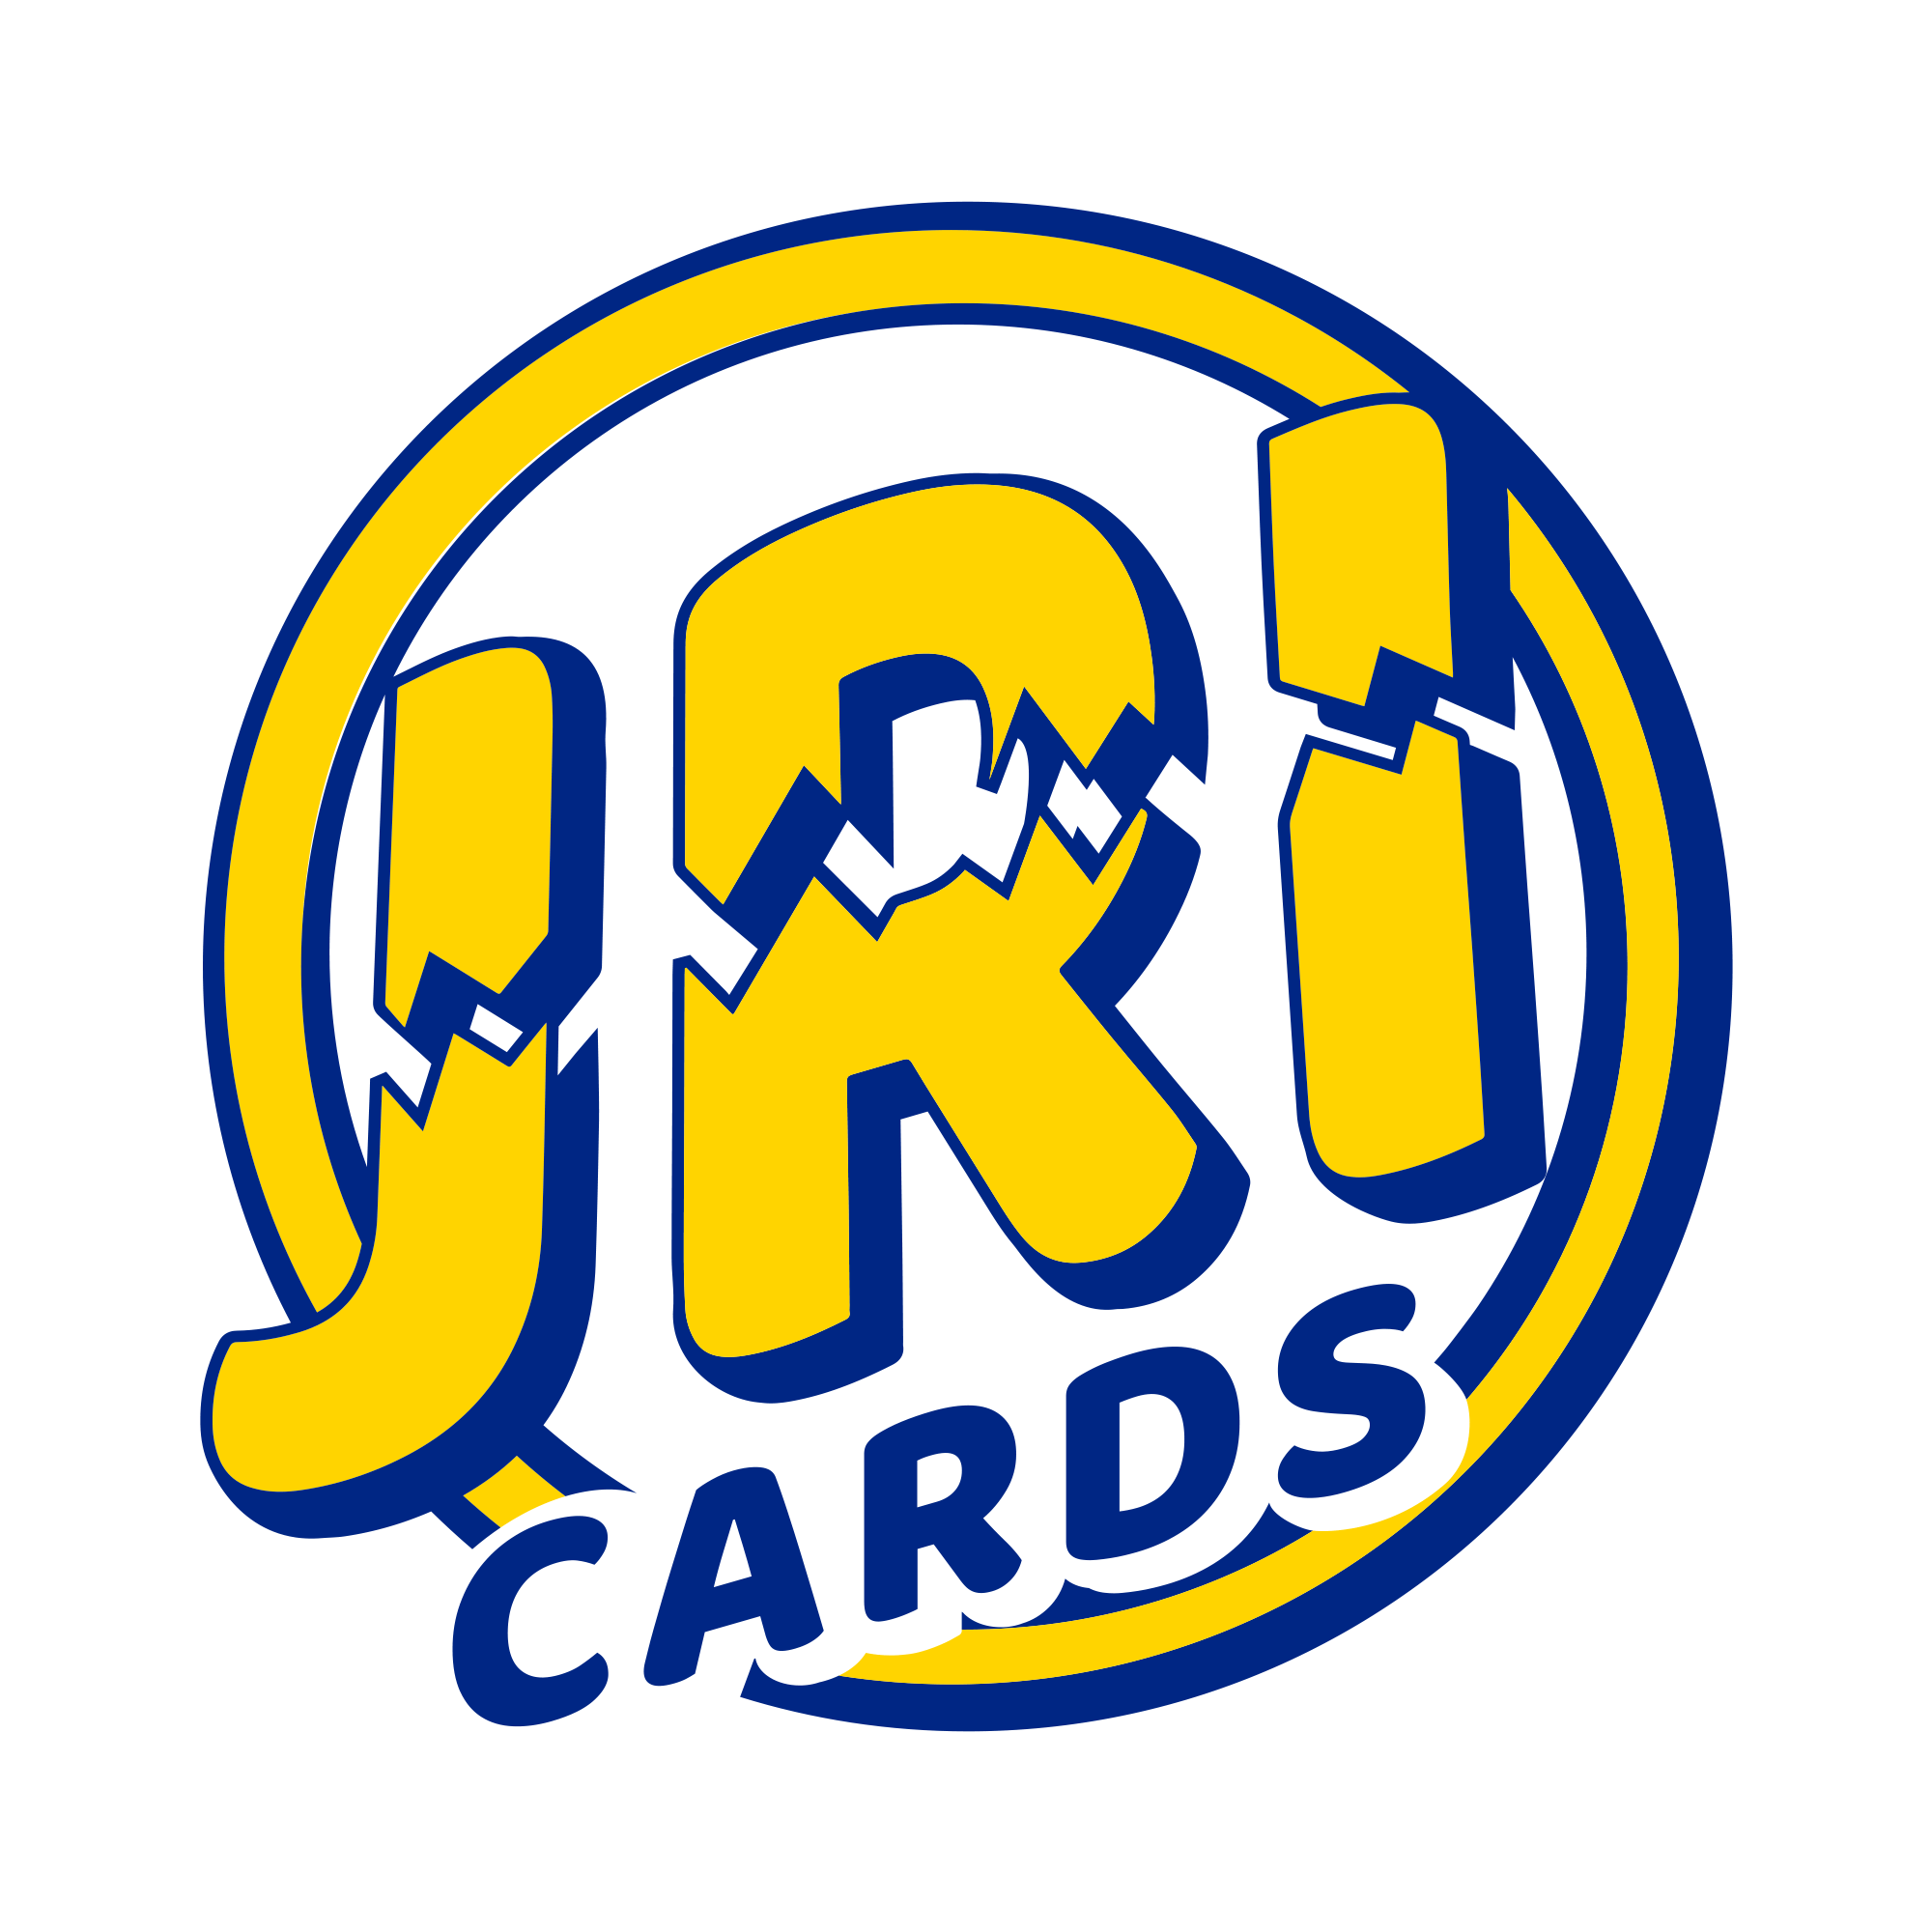 JRI EVENT|1971 TOPPS FOOTBALL 2ND SERIES CELLO PACK + 1998 UD SP AUTHENTIC FOOTBALL HOBBY BOX (80 TICKETS AVAILABLE) + JRI BLENDER (80 SPOTS)